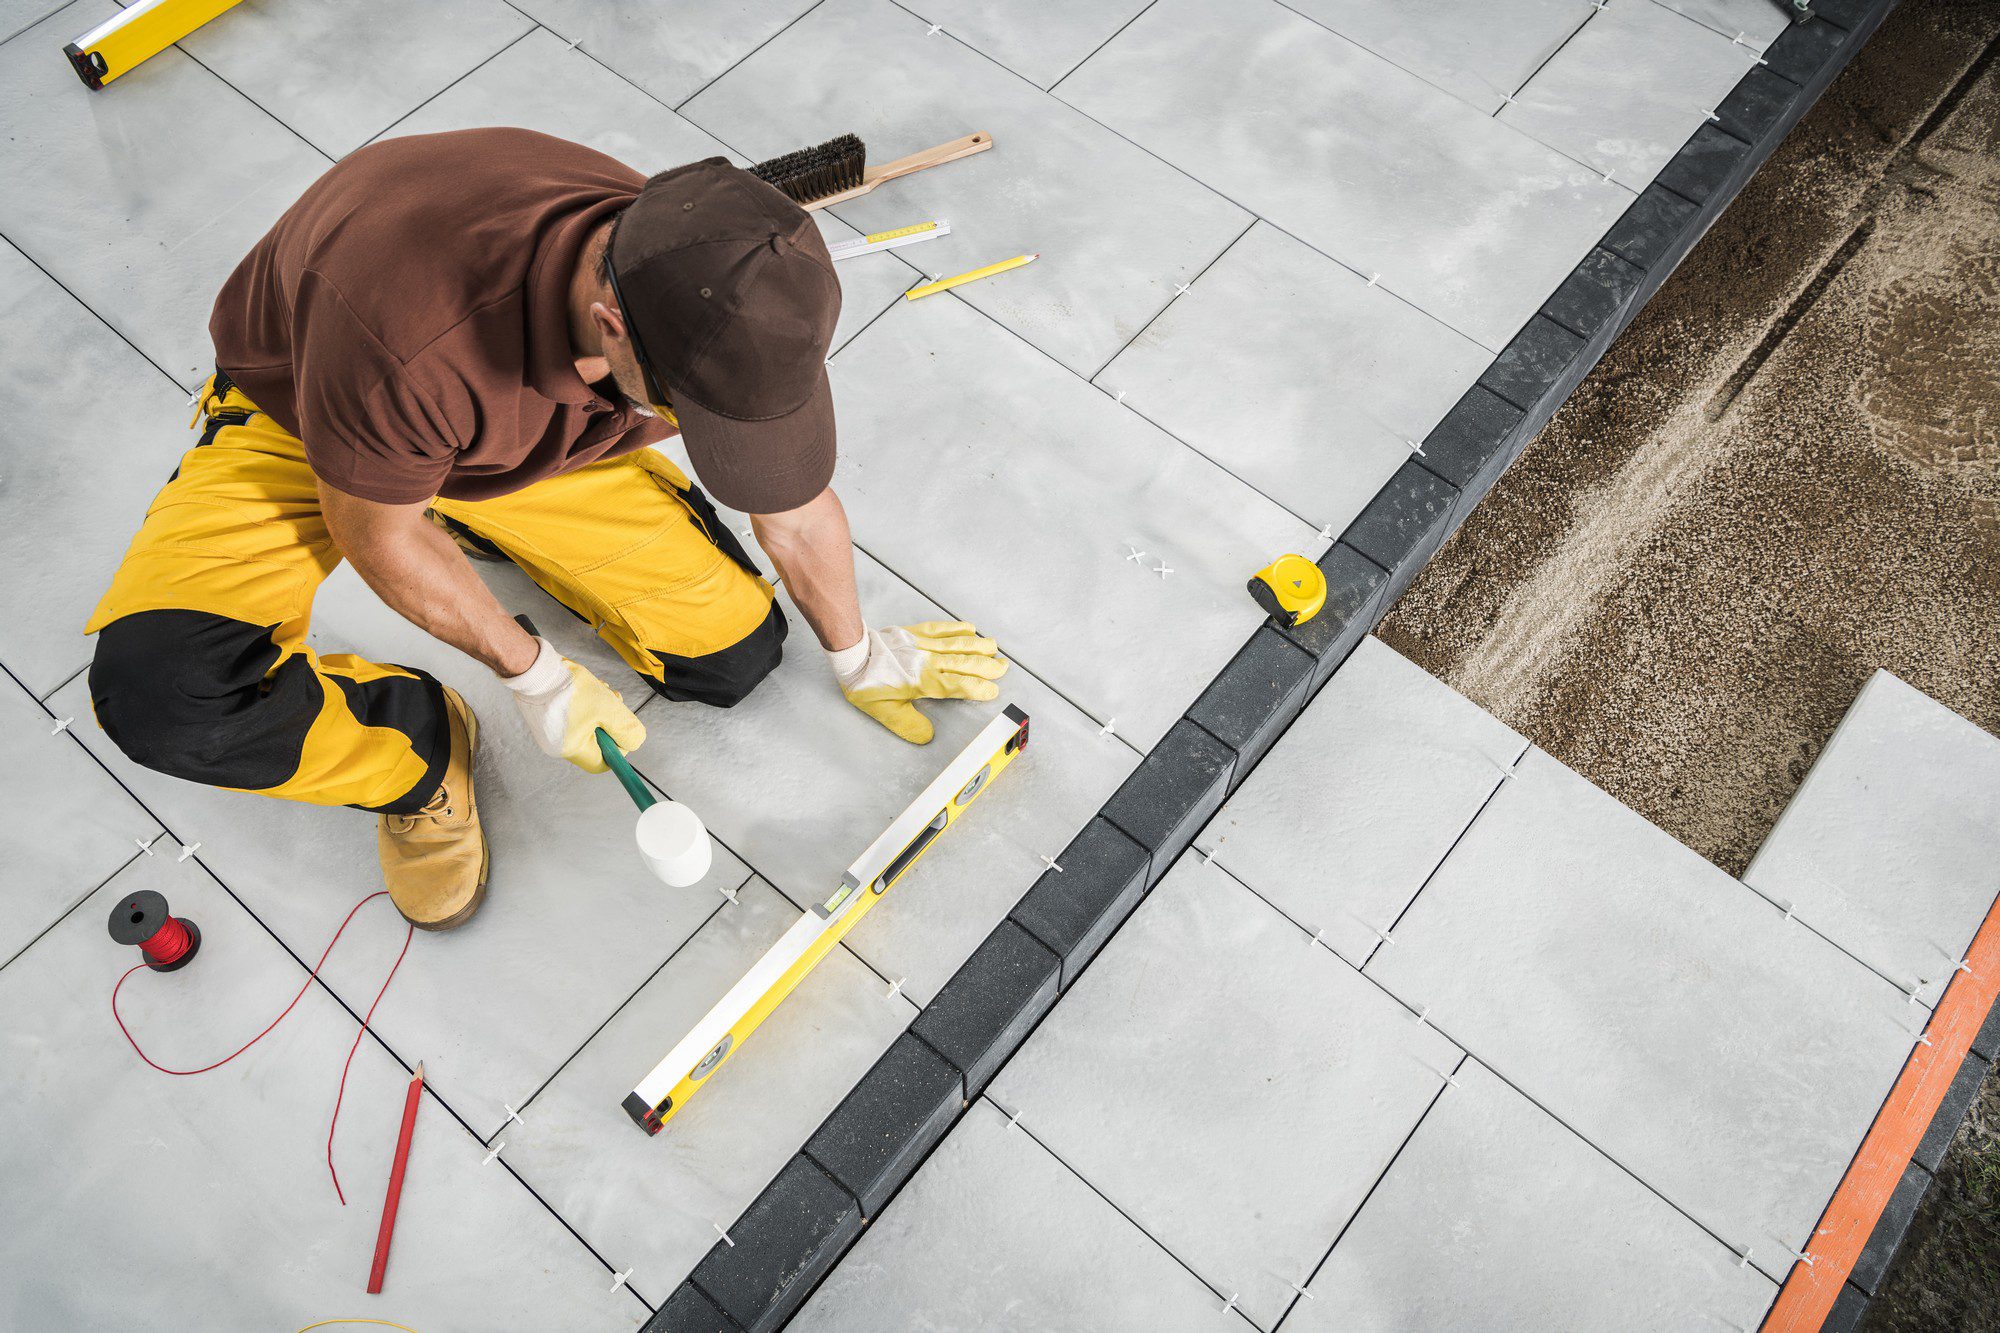 In the image, there is a person in the process of laying square tiles on a floor. This person is using various tools and materials to ensure accurate and level placement of the tiles. Here's what I observe:1. The individual is wearing protective gear such as gloves and knee pads for safety and comfort while performing the work.
2. They are using a level to ensure the tiles are flat and even.
3. A tape measure is visible, likely used to measure distances and tile placement accurately.
4. Spacers have been placed between the tiles to ensure equal spacing and alignment.
5. There's a rubber mallet, which is commonly used to gently tap tiles into place without cracking them.
6. I can see a trowel or similar tool possibly used for spreading adhesive.
7. In the foreground, there is a partially completed section of tilework, and in the uncovered area, we see the substrate which appears to have been prepared for tile installation.
8. In the background, there is a string line and additional loose tiles ready for installation.The scene is indicative of construction or renovation work where precision and manual skill are essential.